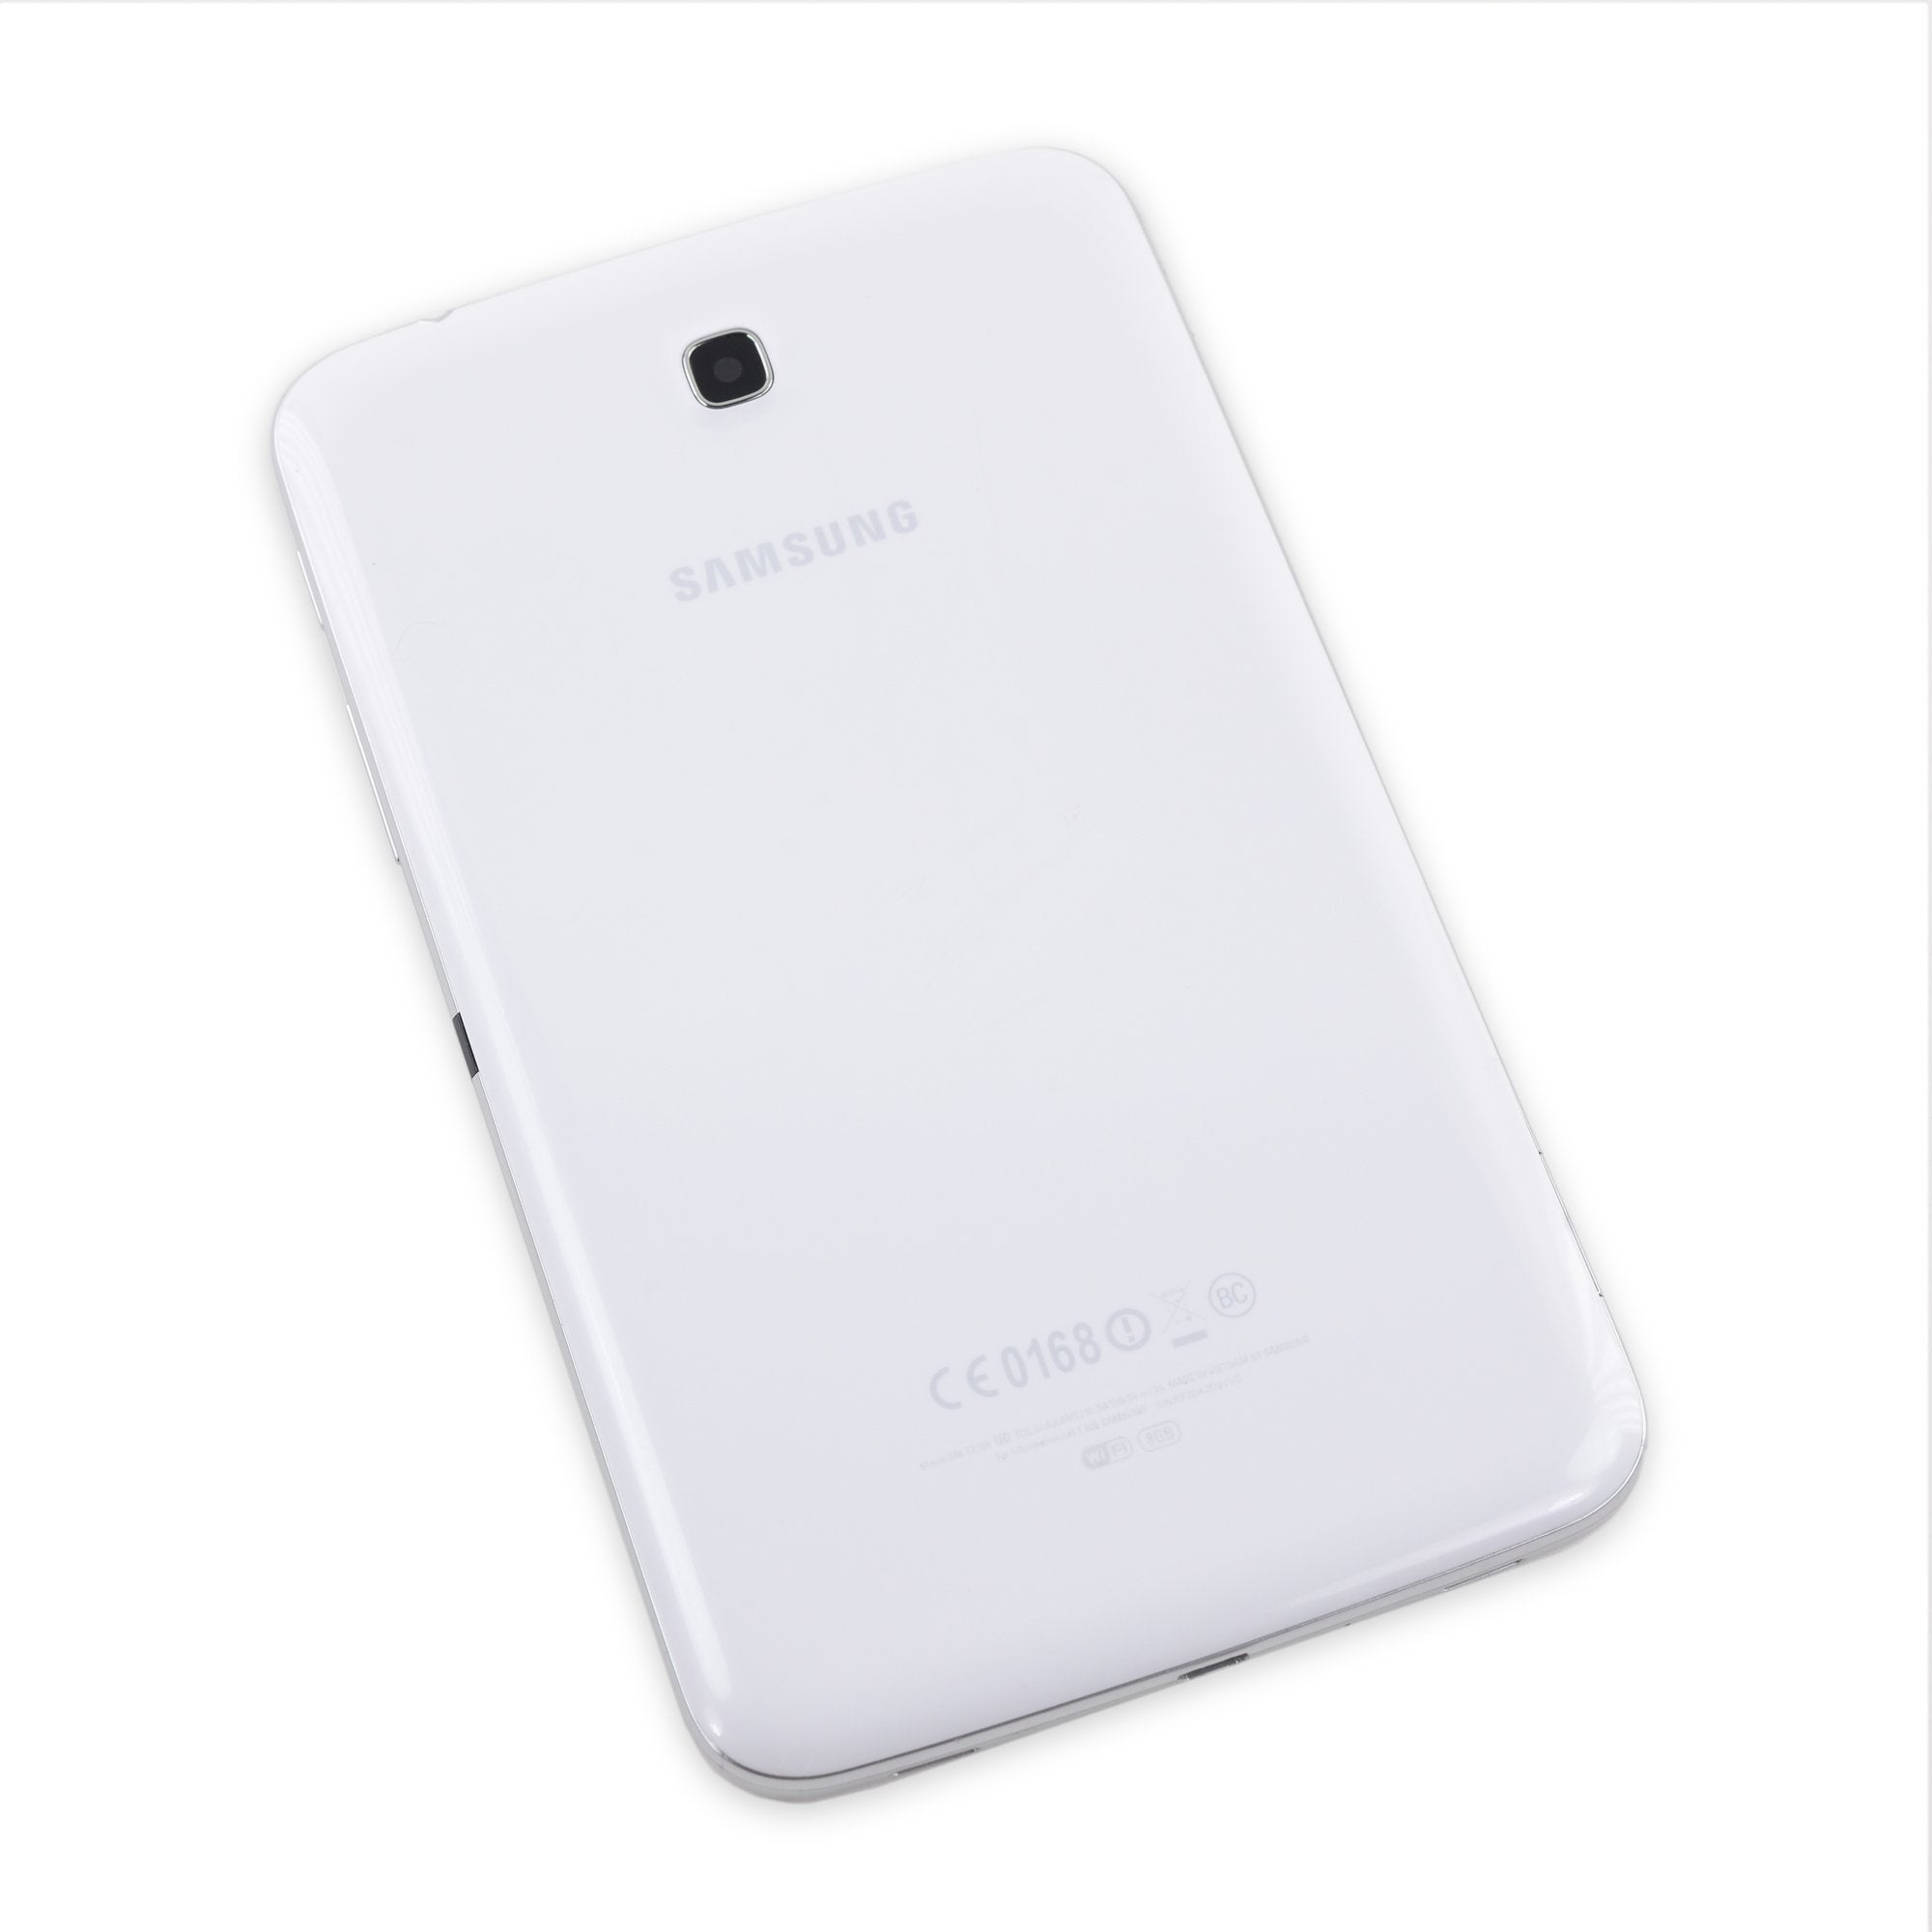 Galaxy Tab 3 7.0 Rear Case White Used, A-Stock